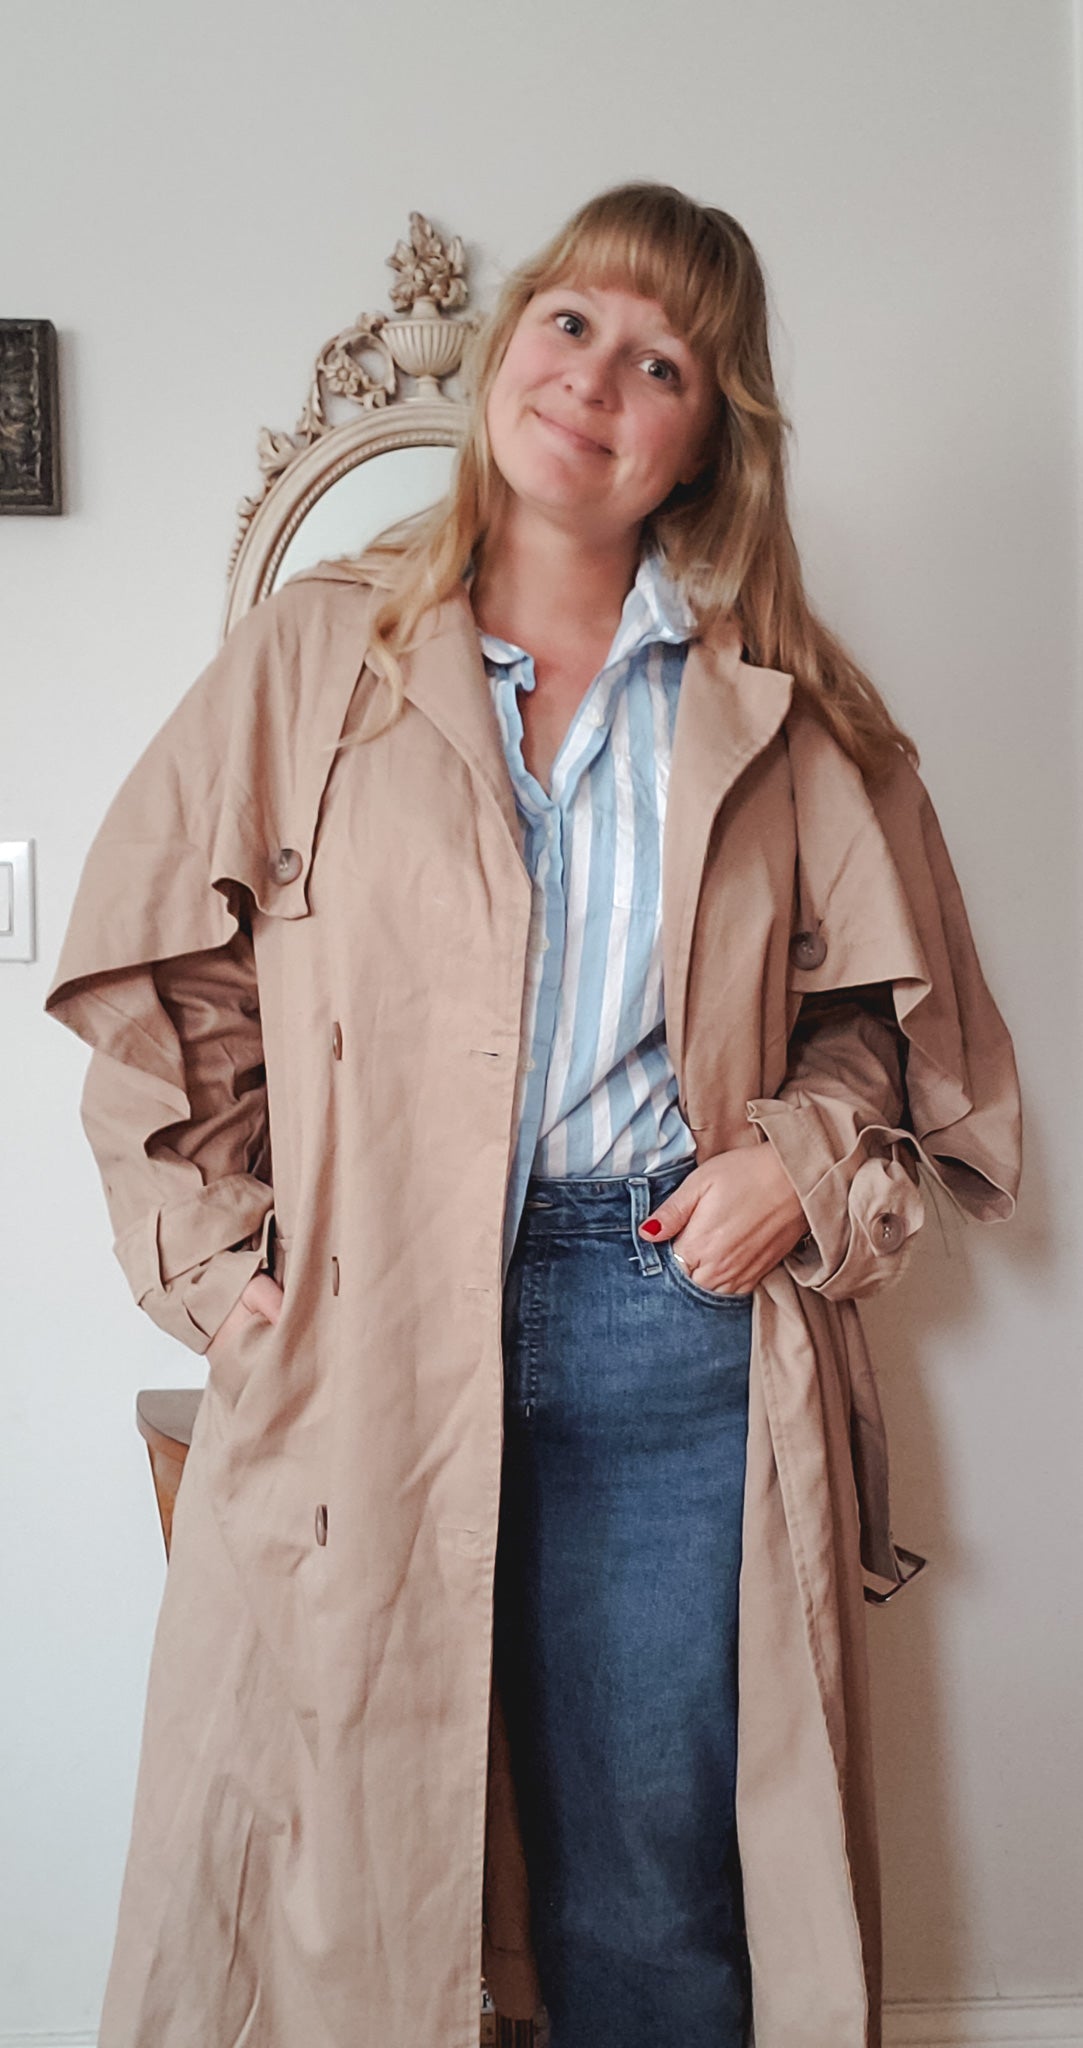 TAN TRENCH COAT SIZE LARGE